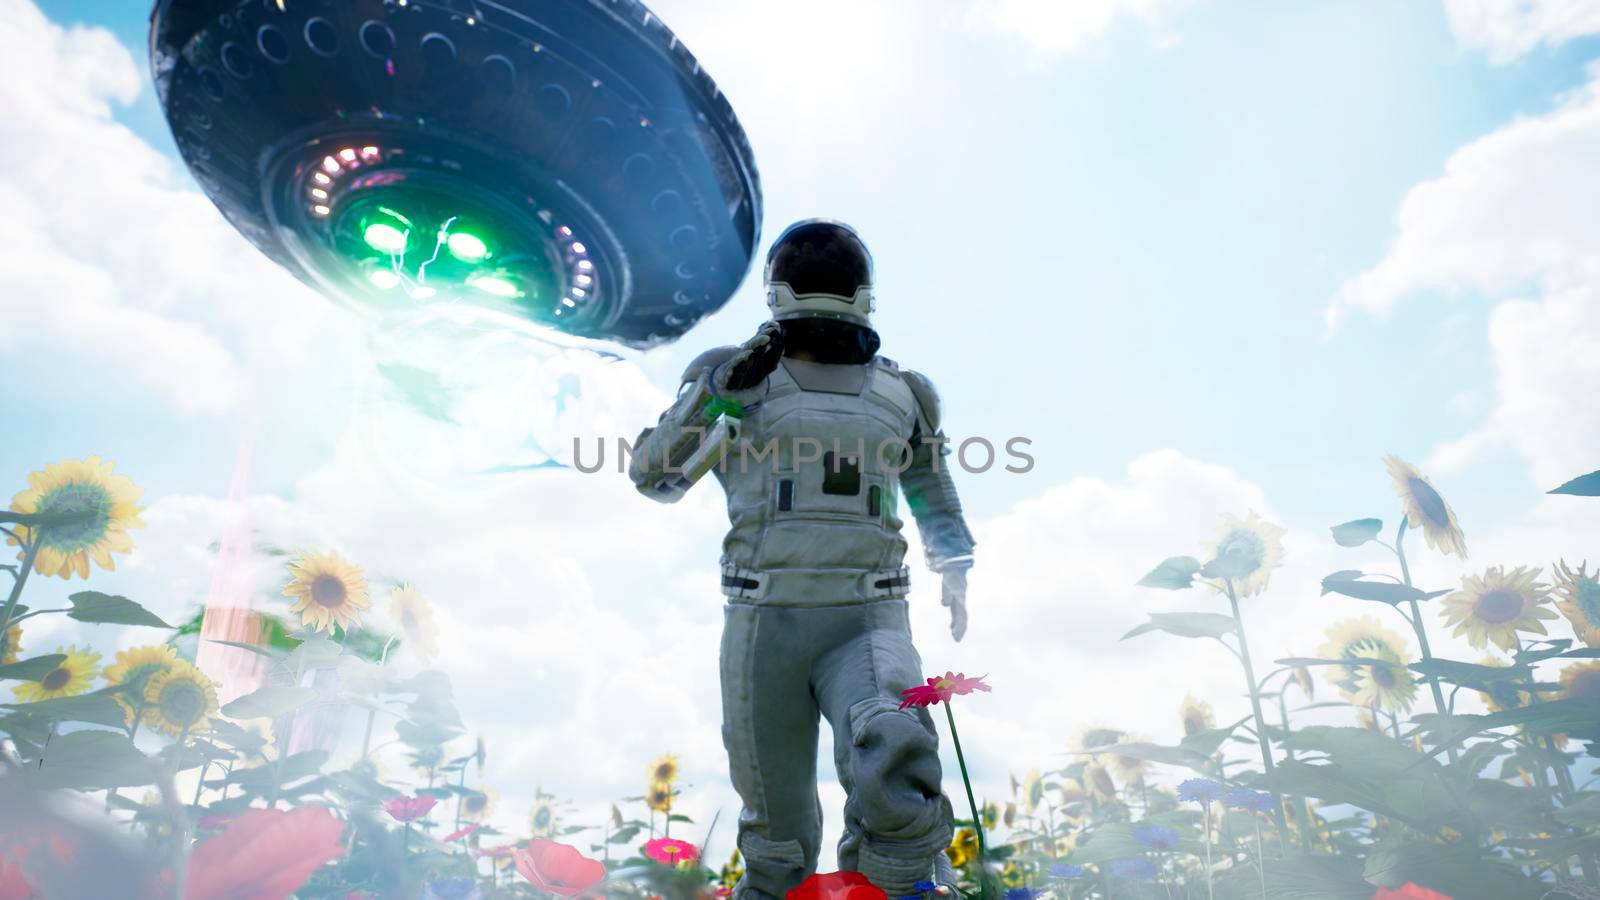 An alien flying saucer chases an astronaut running through a flower field. The concept of a UFO or alien spacecraft.